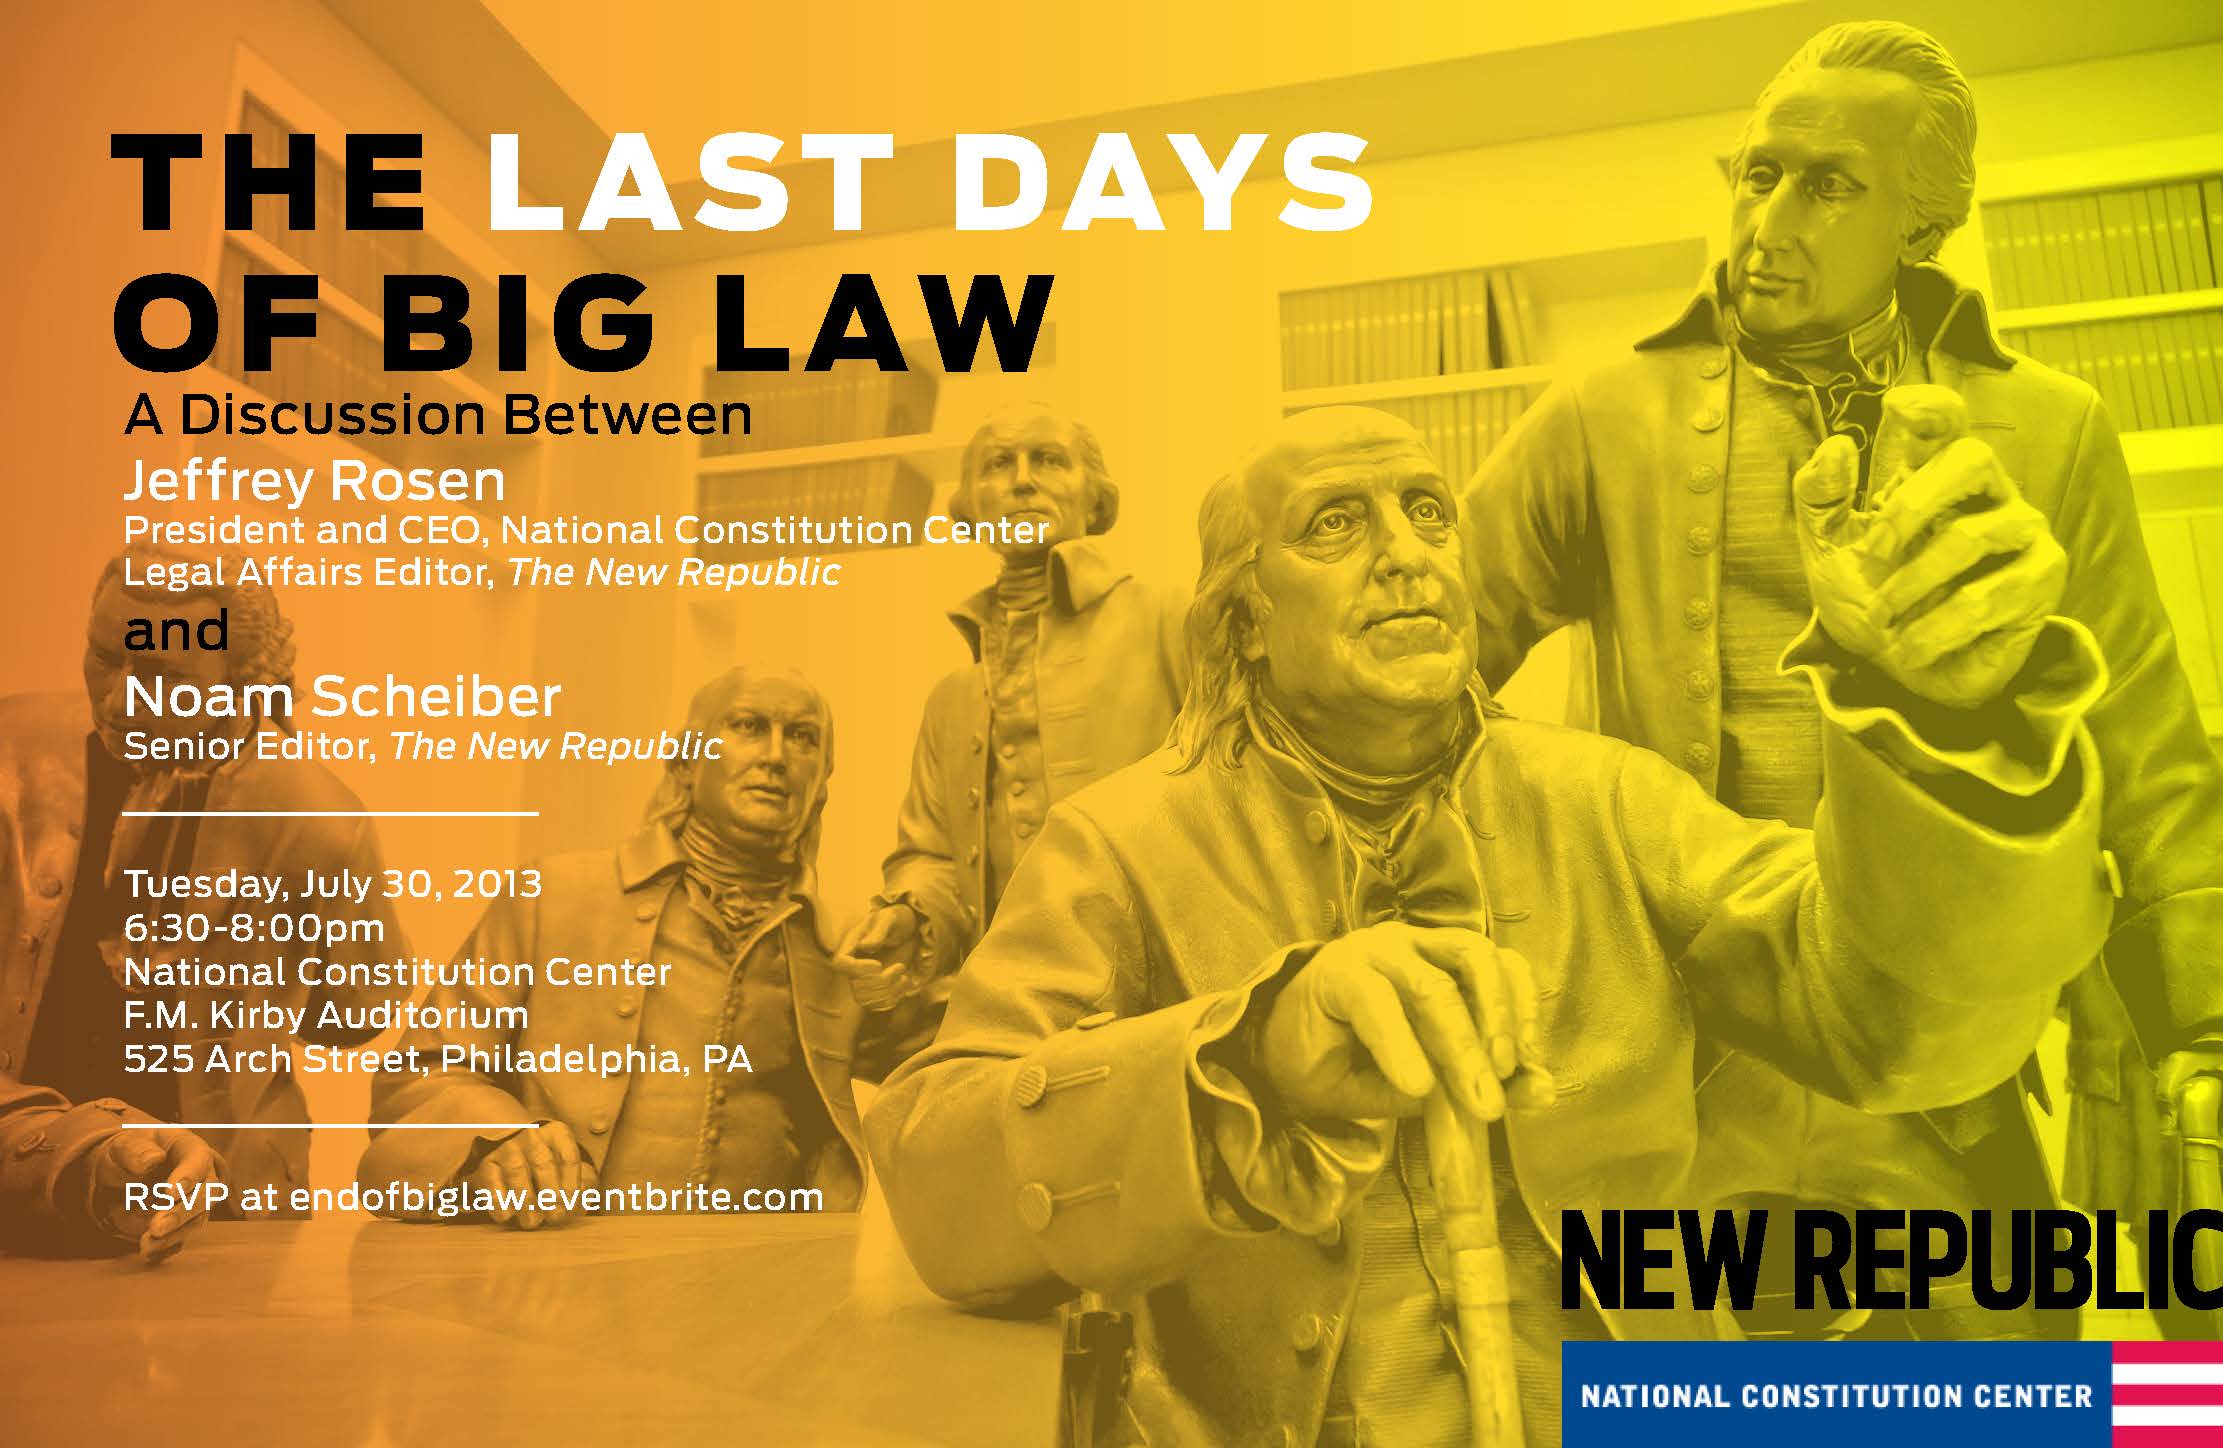 The Last Days of Big Law